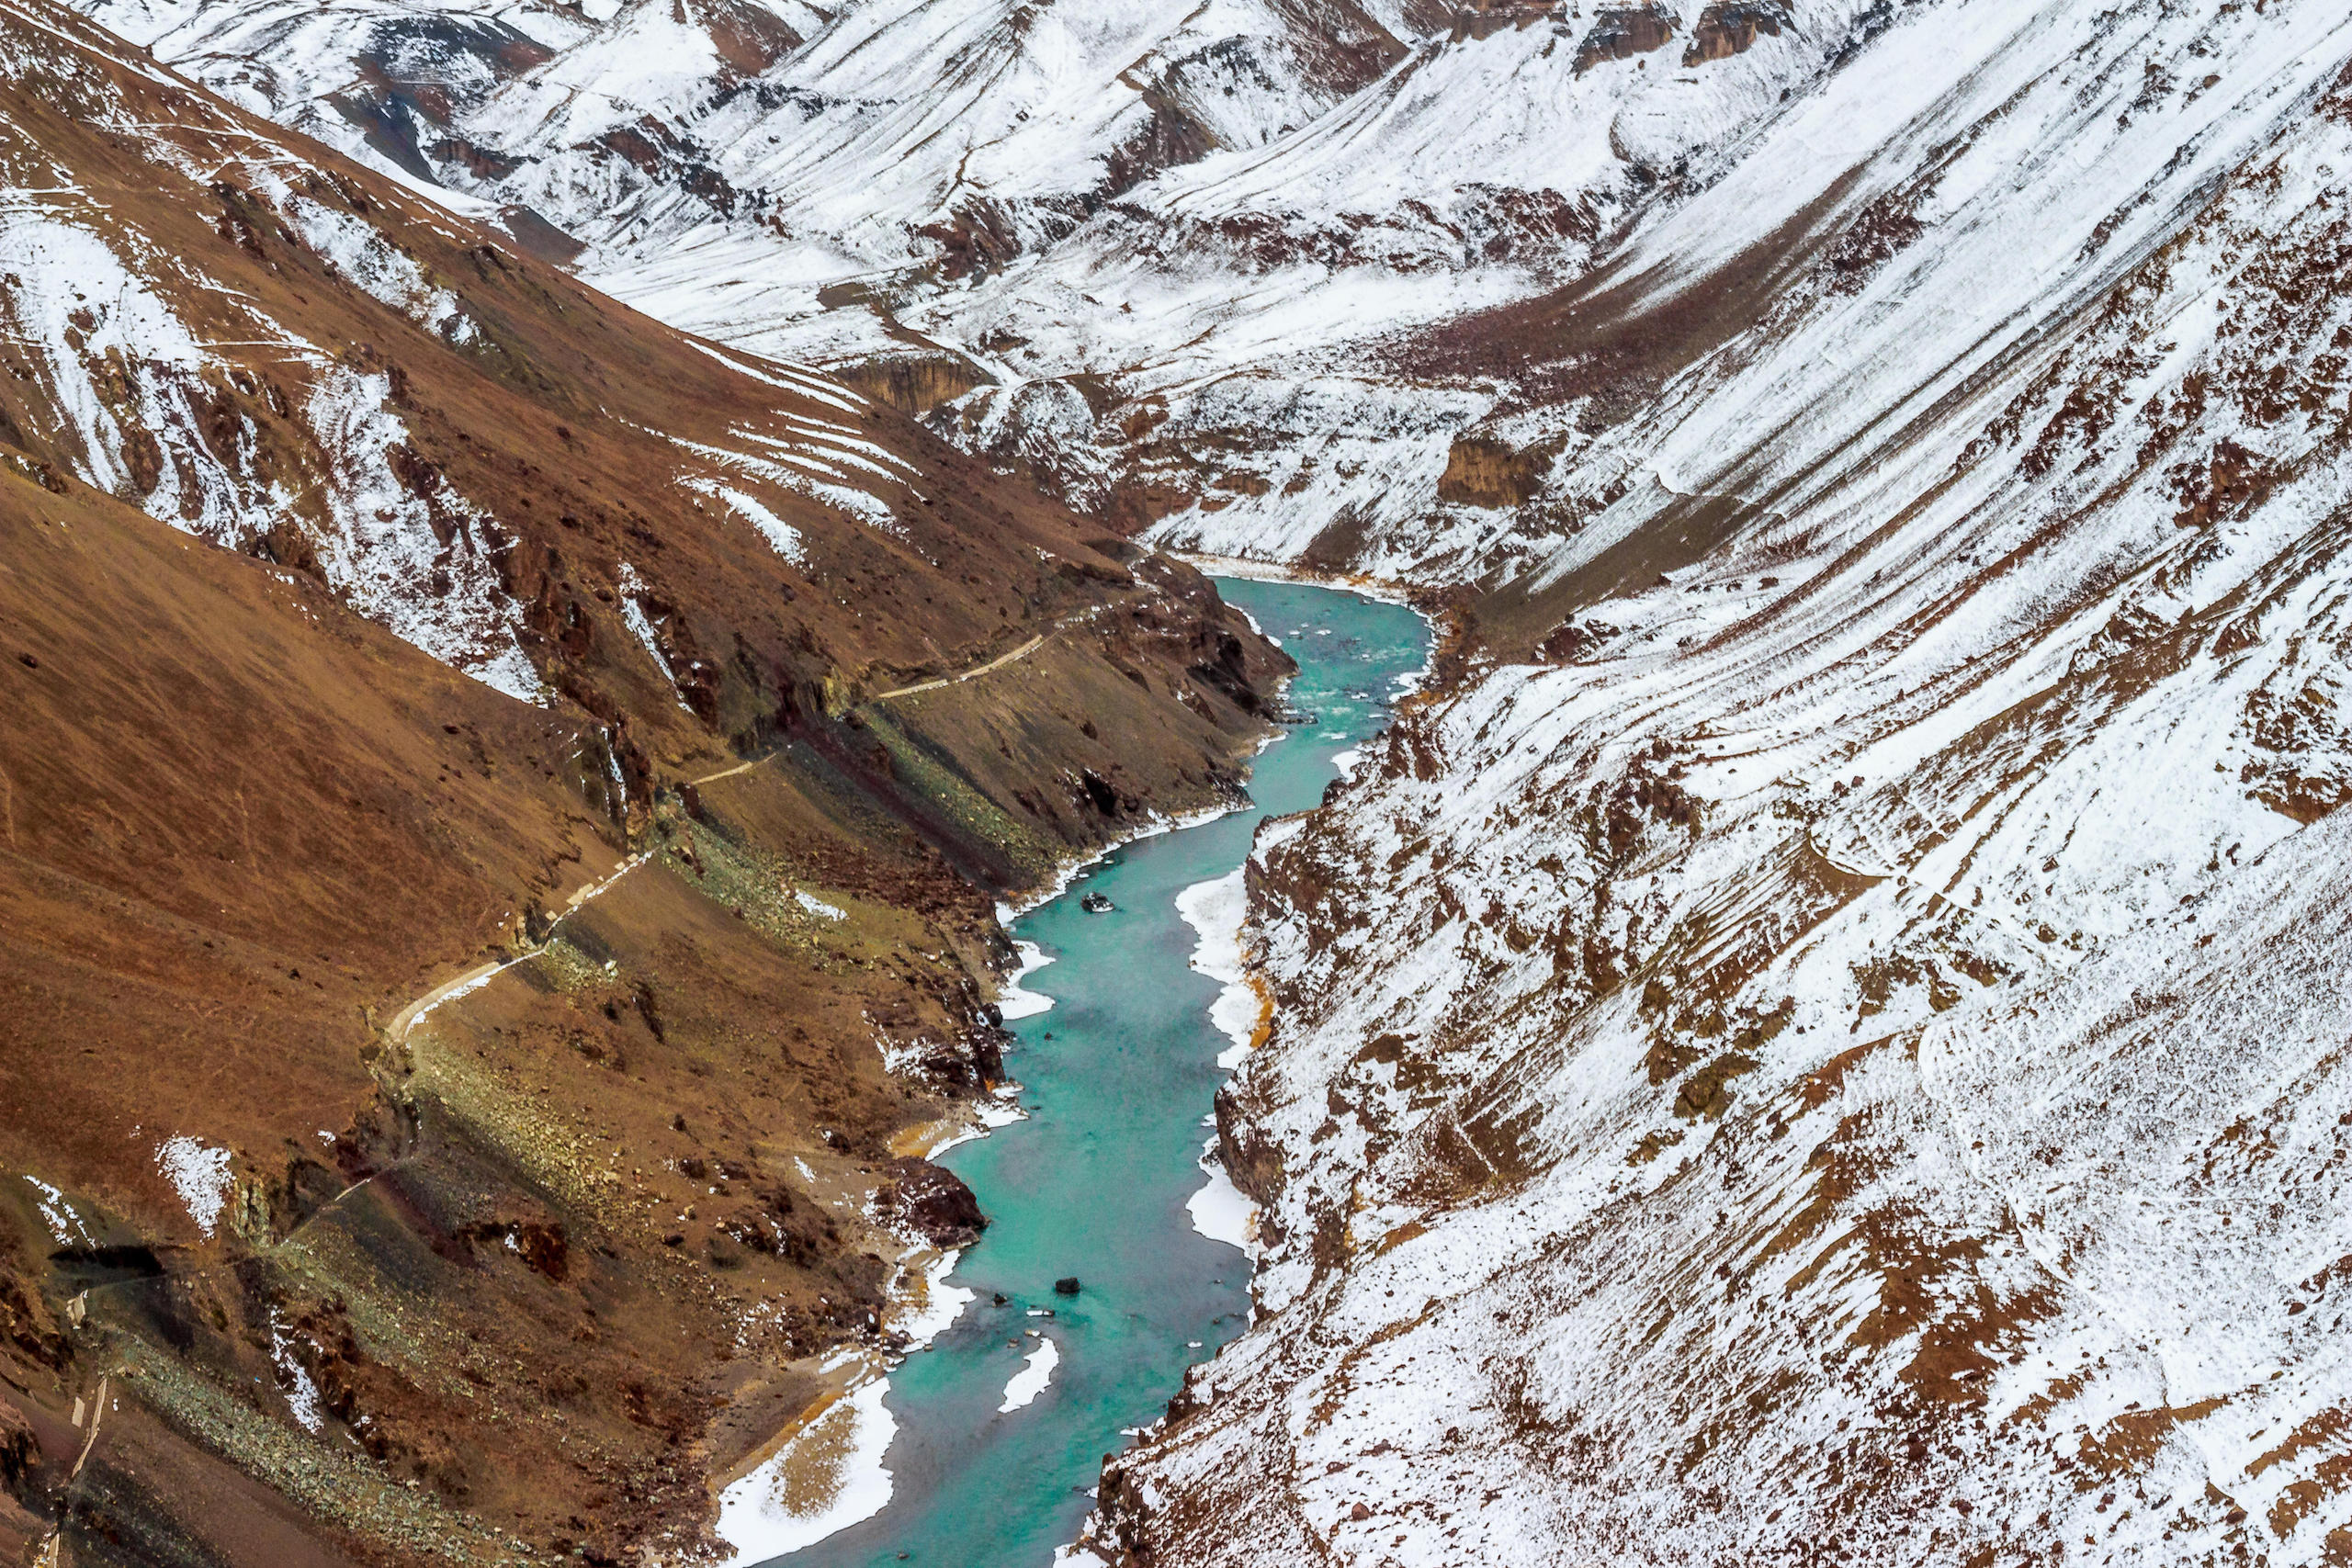 <p>The Indus River flows between the snow capped mountains of the Ladakh Range of the Himalayas. The authors of ‘Governing the “Water Tower of Asia”’ have developed a concept they call ‘System of Integrated Knowledge (SINK)’ – a more holistic approach to water that balances its multiple uses and creates a new system for water knowledge (Image: Parvesh Jain / Alamy)</p>